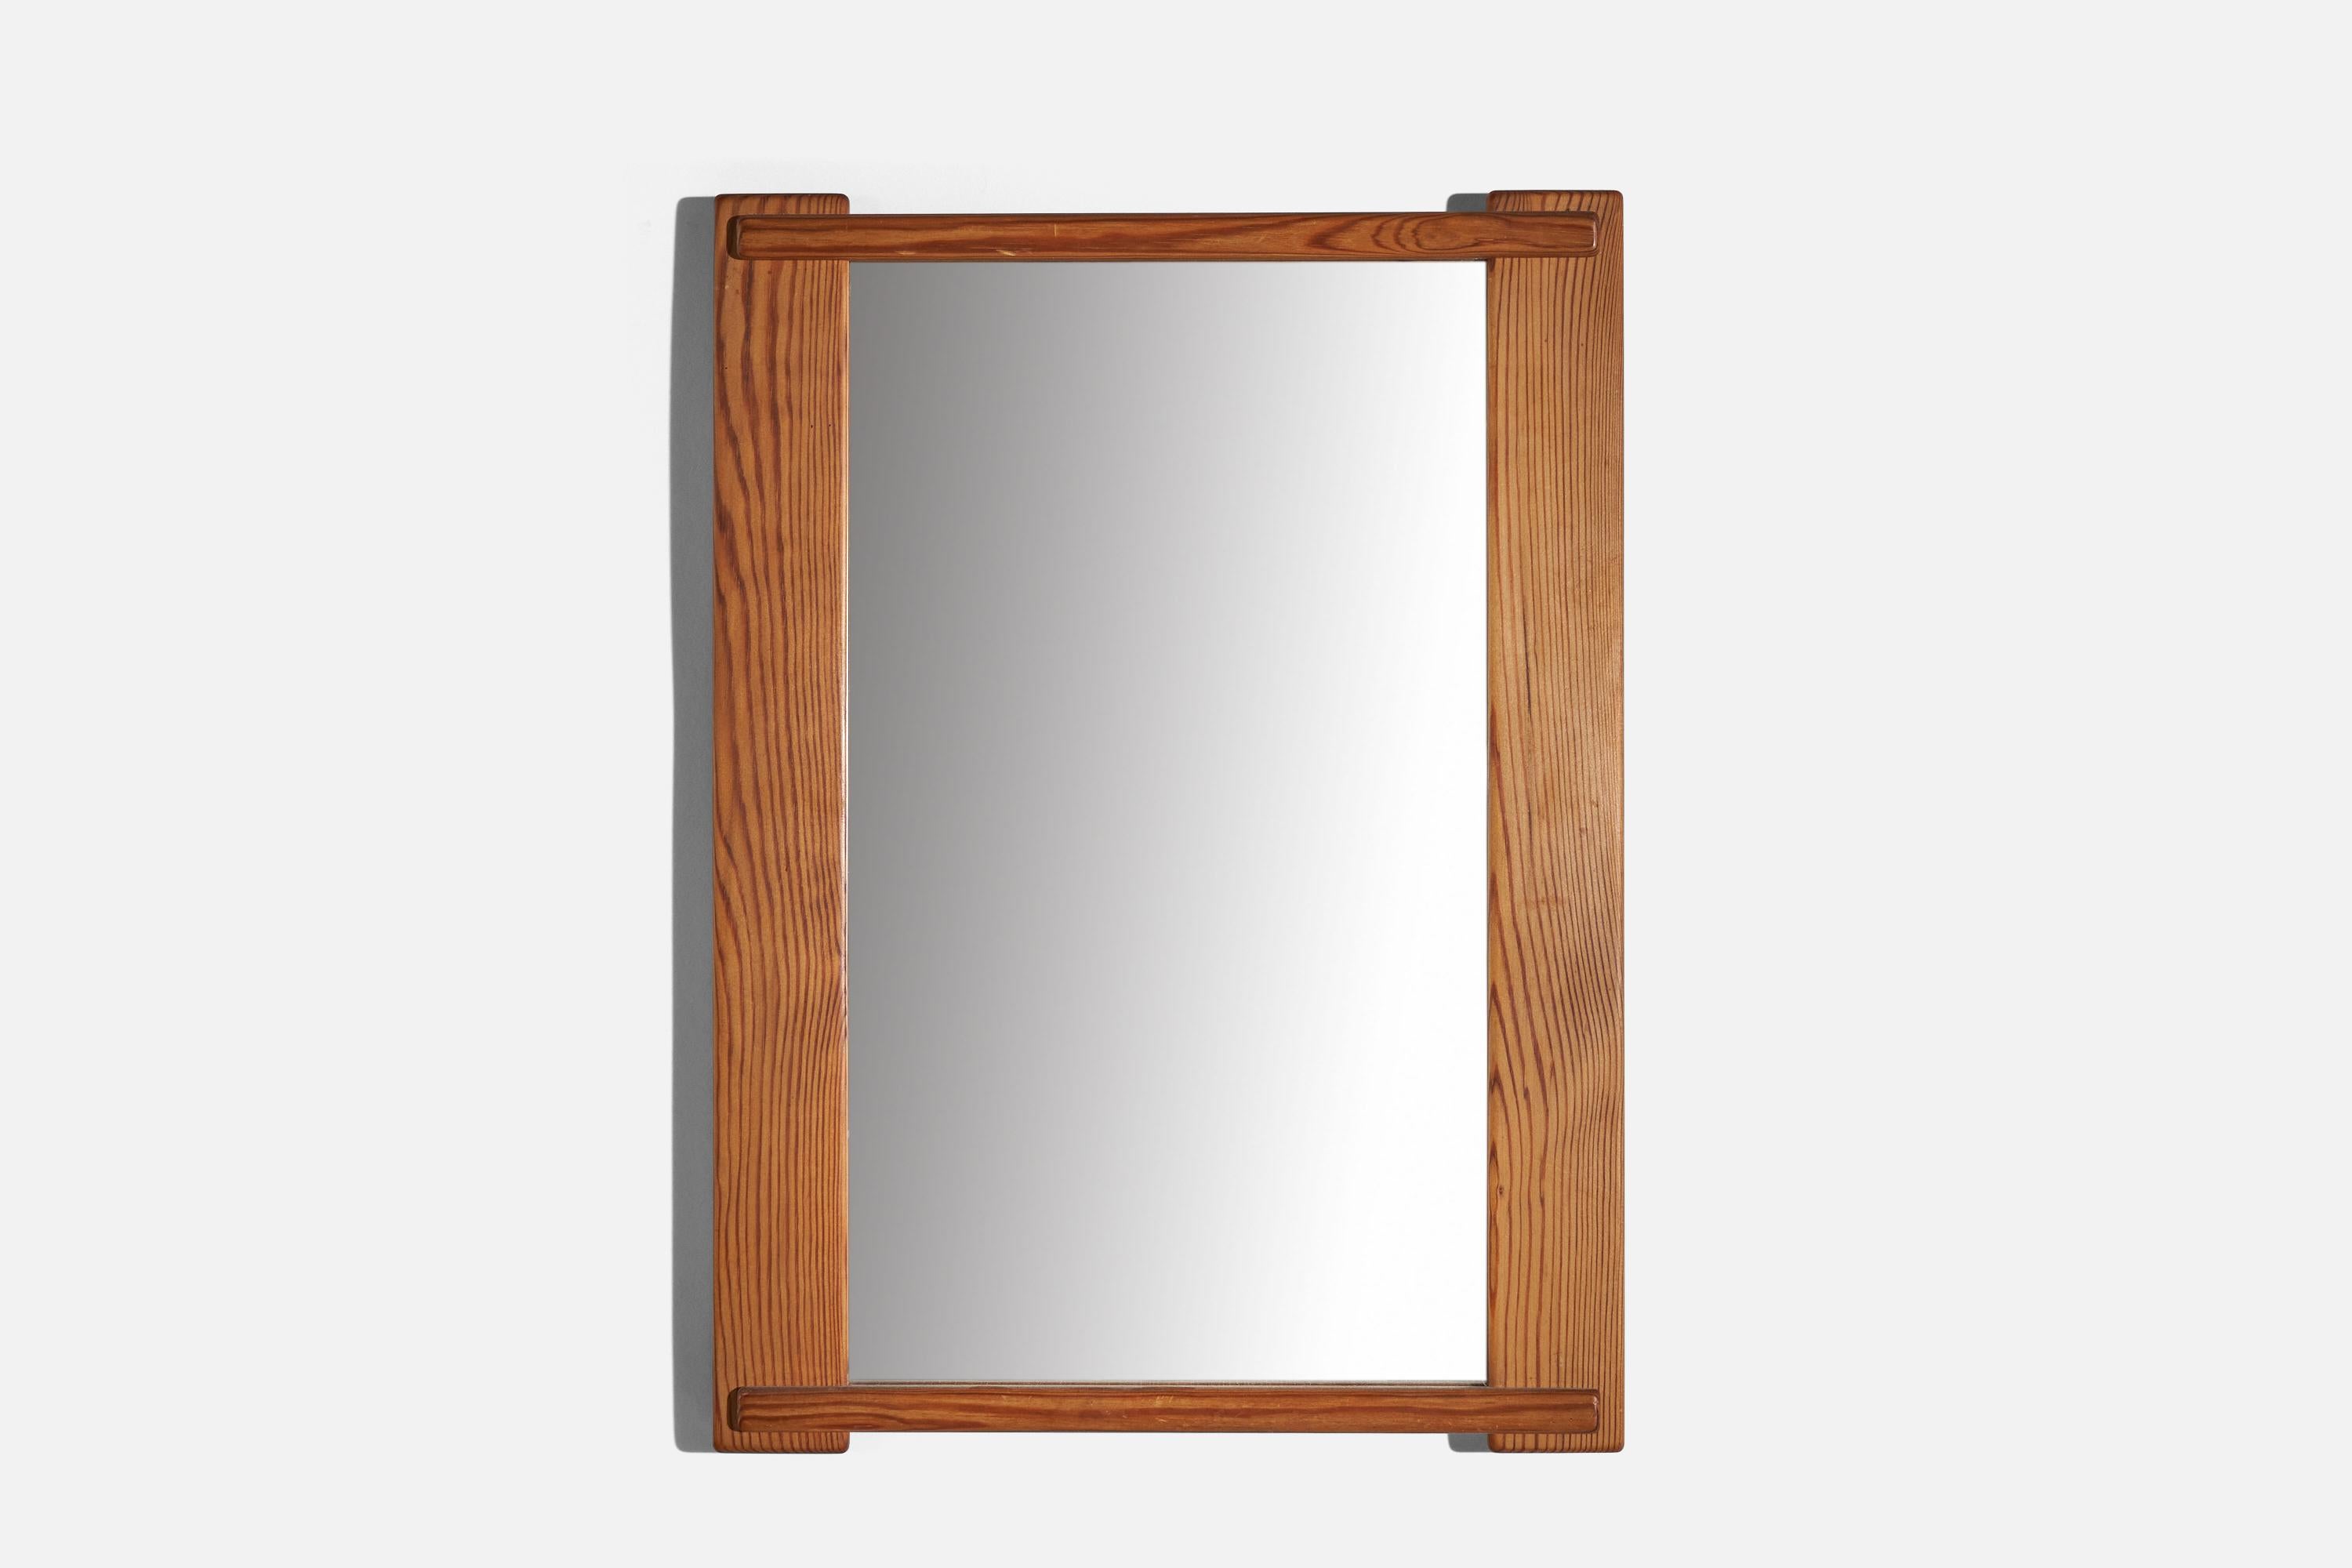 A pine wall mirror designed and produced in Sweden, 1970s.
   